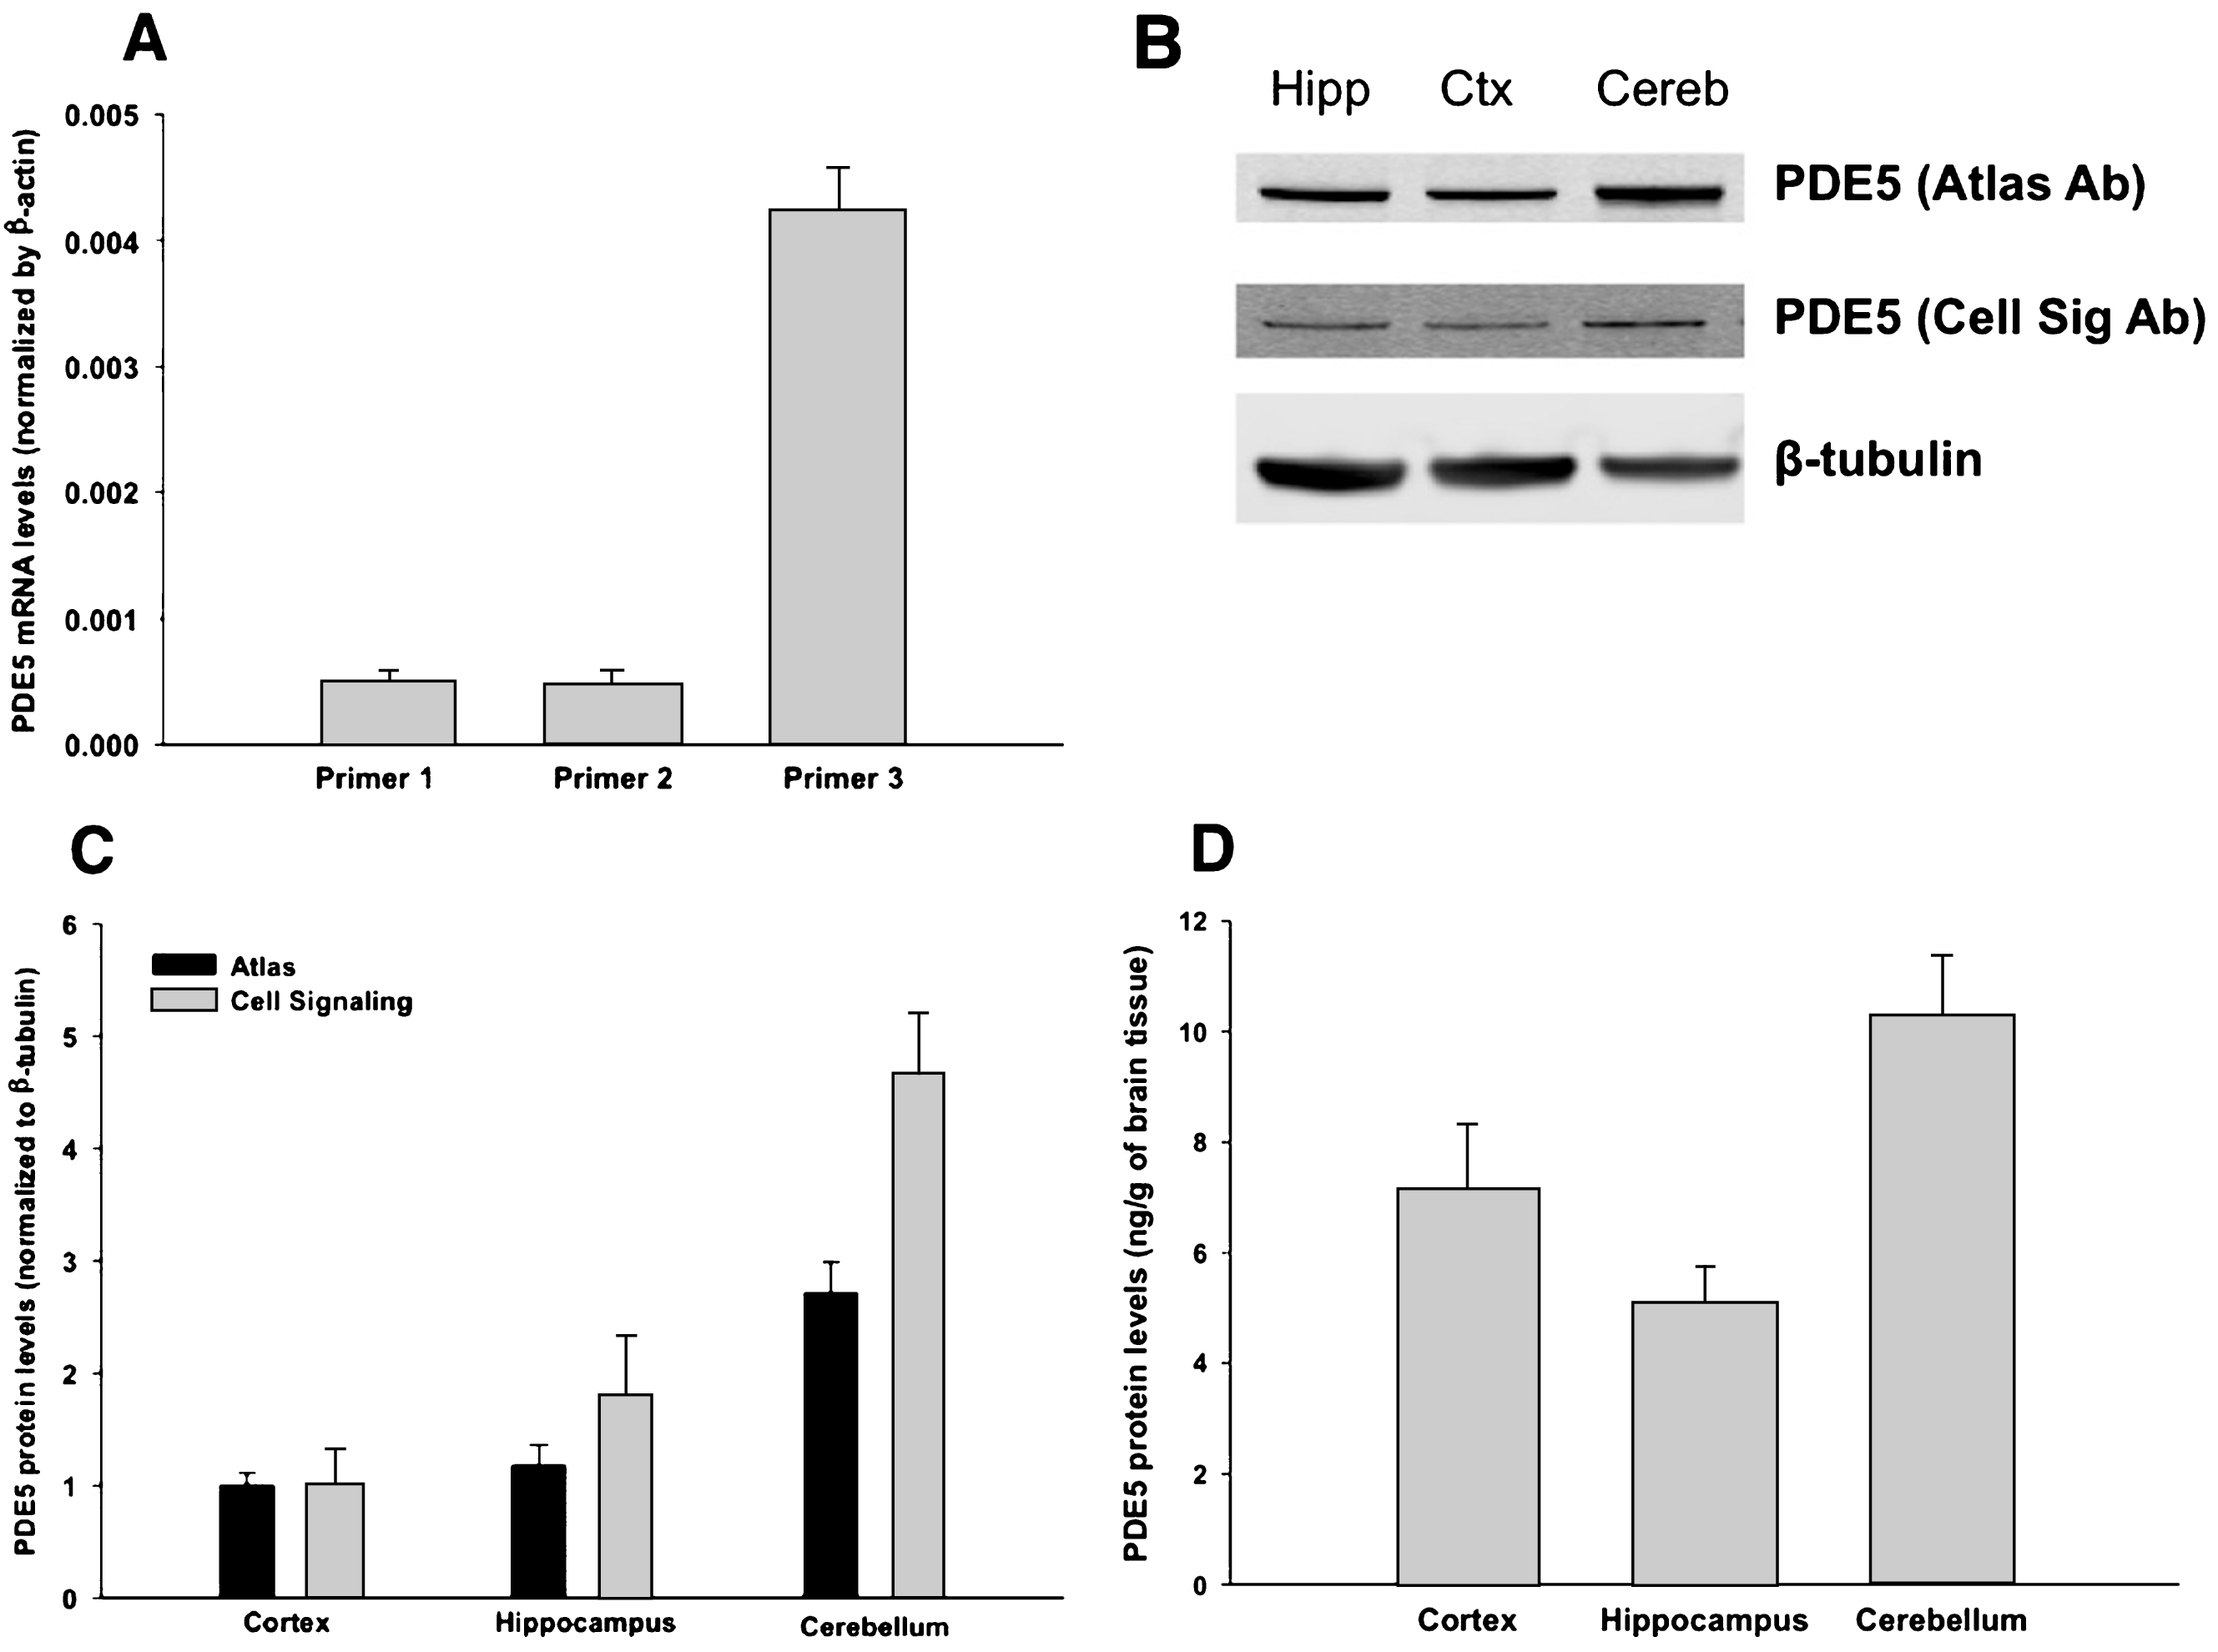 PDE5 exists in human brain tissue. A) PDE5 mRNA was detected by qPCR in human cortex using 3 different primers (see Methods), against the 3’UTR region (each primer shows the average for 3 samples; error bars are standard error). Values are normalized against β-actin. B) PDE5 protein was detected in human cortex, hippocampus, and cerebellum by western blot, using two different antibodies to PDE5 (Cell Signaling and Atlas, see methods). All values are normalized by β-tubulin. Then, for each antibody, the values for hippocampus and cerebellum are normalized to cortex. See Supplementary Information for full, uncut blots. C) Values from B are quantified (3 samples in each group – each sample is from a different human subject; error bars are standard error). We evaluated the results using a two-tailed t-test. For both antibodies, there is no statistical difference between cortex and hippocampus (p-value 0.2 for Atlas, 0.09 for Cell Signaling). In contrast, both antibodies show a significant difference between cortex and cerebellum (p-value 0.0006 for Atlas, 0.0014 for Cell Signaling) and between hippocampus and cerebellum (p-value 0.004 for Atlas, 0.014 for Cell Signaling). D) The amount of PDE5 in brain tissue was quantified by ELISA. PDE5 protein was found in the cortex, hippocampus, and cerebellum at a concentration of 7.15, 5.08, and 10.29 ng/g of brain tissue, respectively (3 samples in each group; error bars are standard error). We evaluated the results using a two-tailed t-test. Similarly to the western blot data quantified in panel C, the ELISA data shows no statistical difference between cortex and hippocampus (p-value 0.08), whereas there is a significant difference between cortex and cerebellum (p-value 0.03) as well as between hippocampus and cerebellum (p-value 0.01).